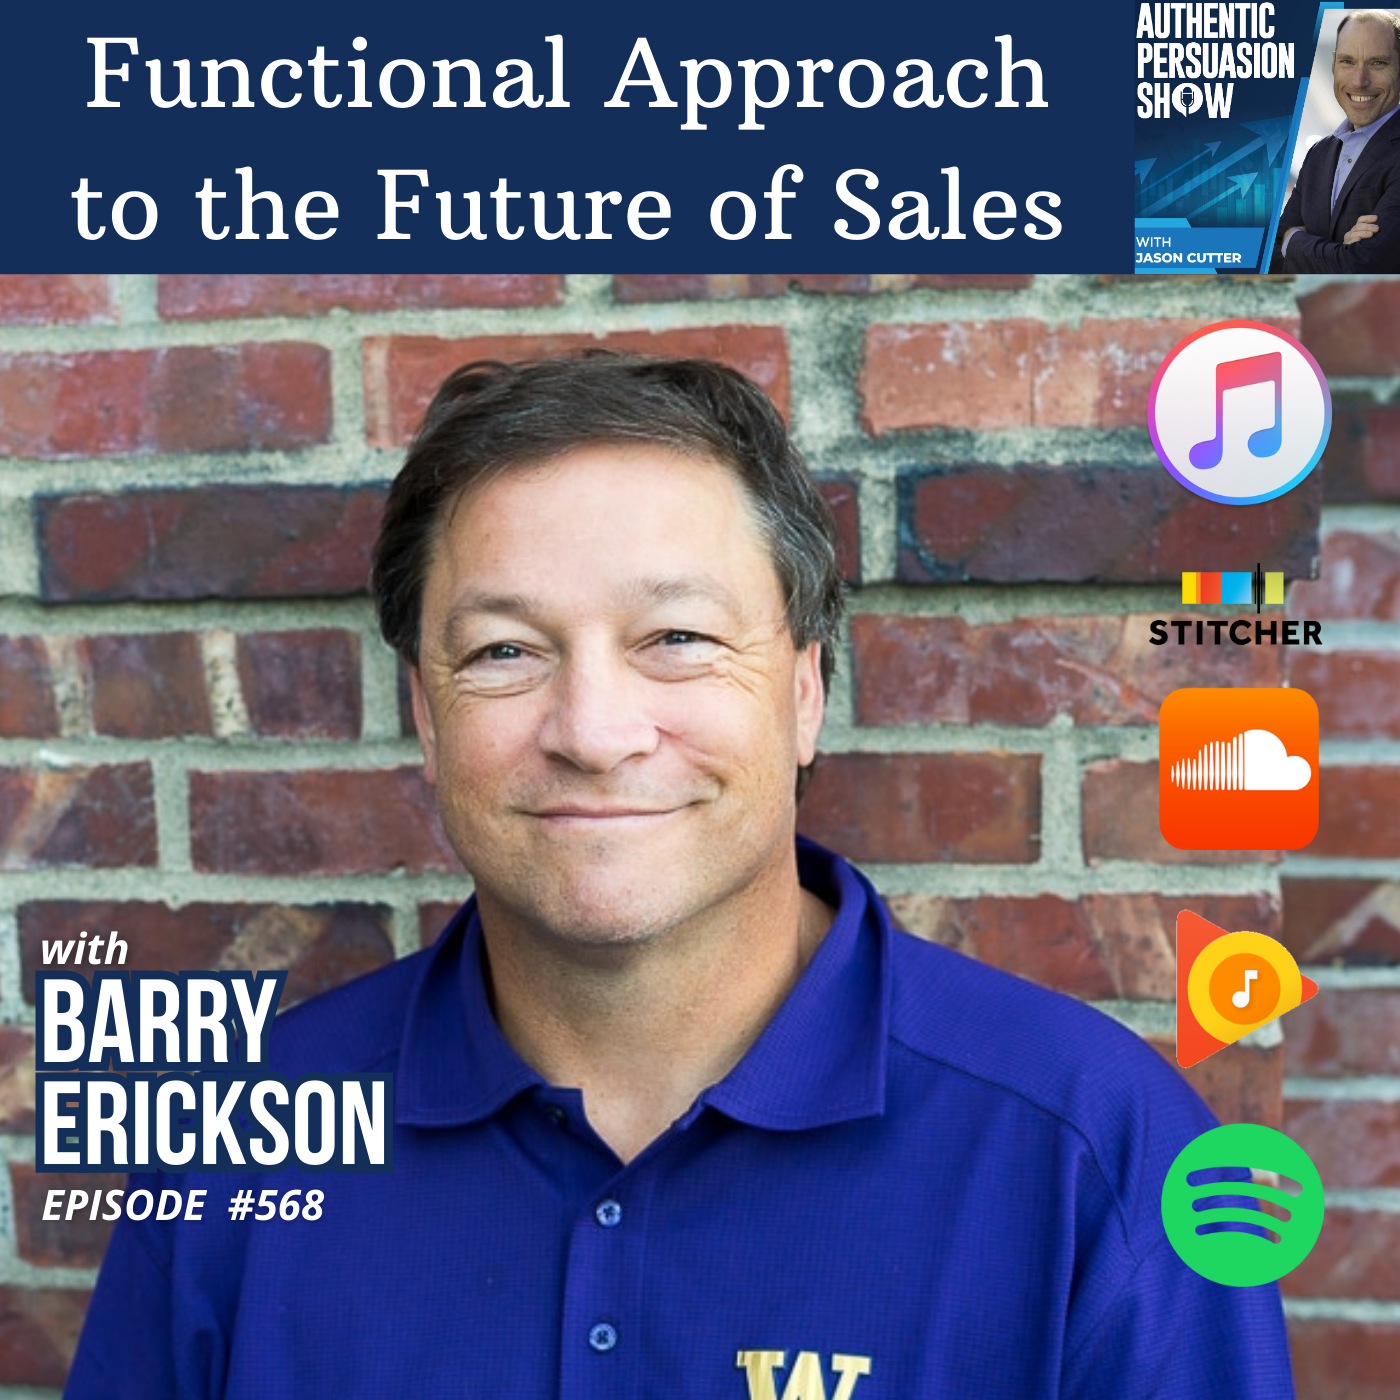 [568] Functional Approach to the Future of Sales, with Barry Erickson from UW